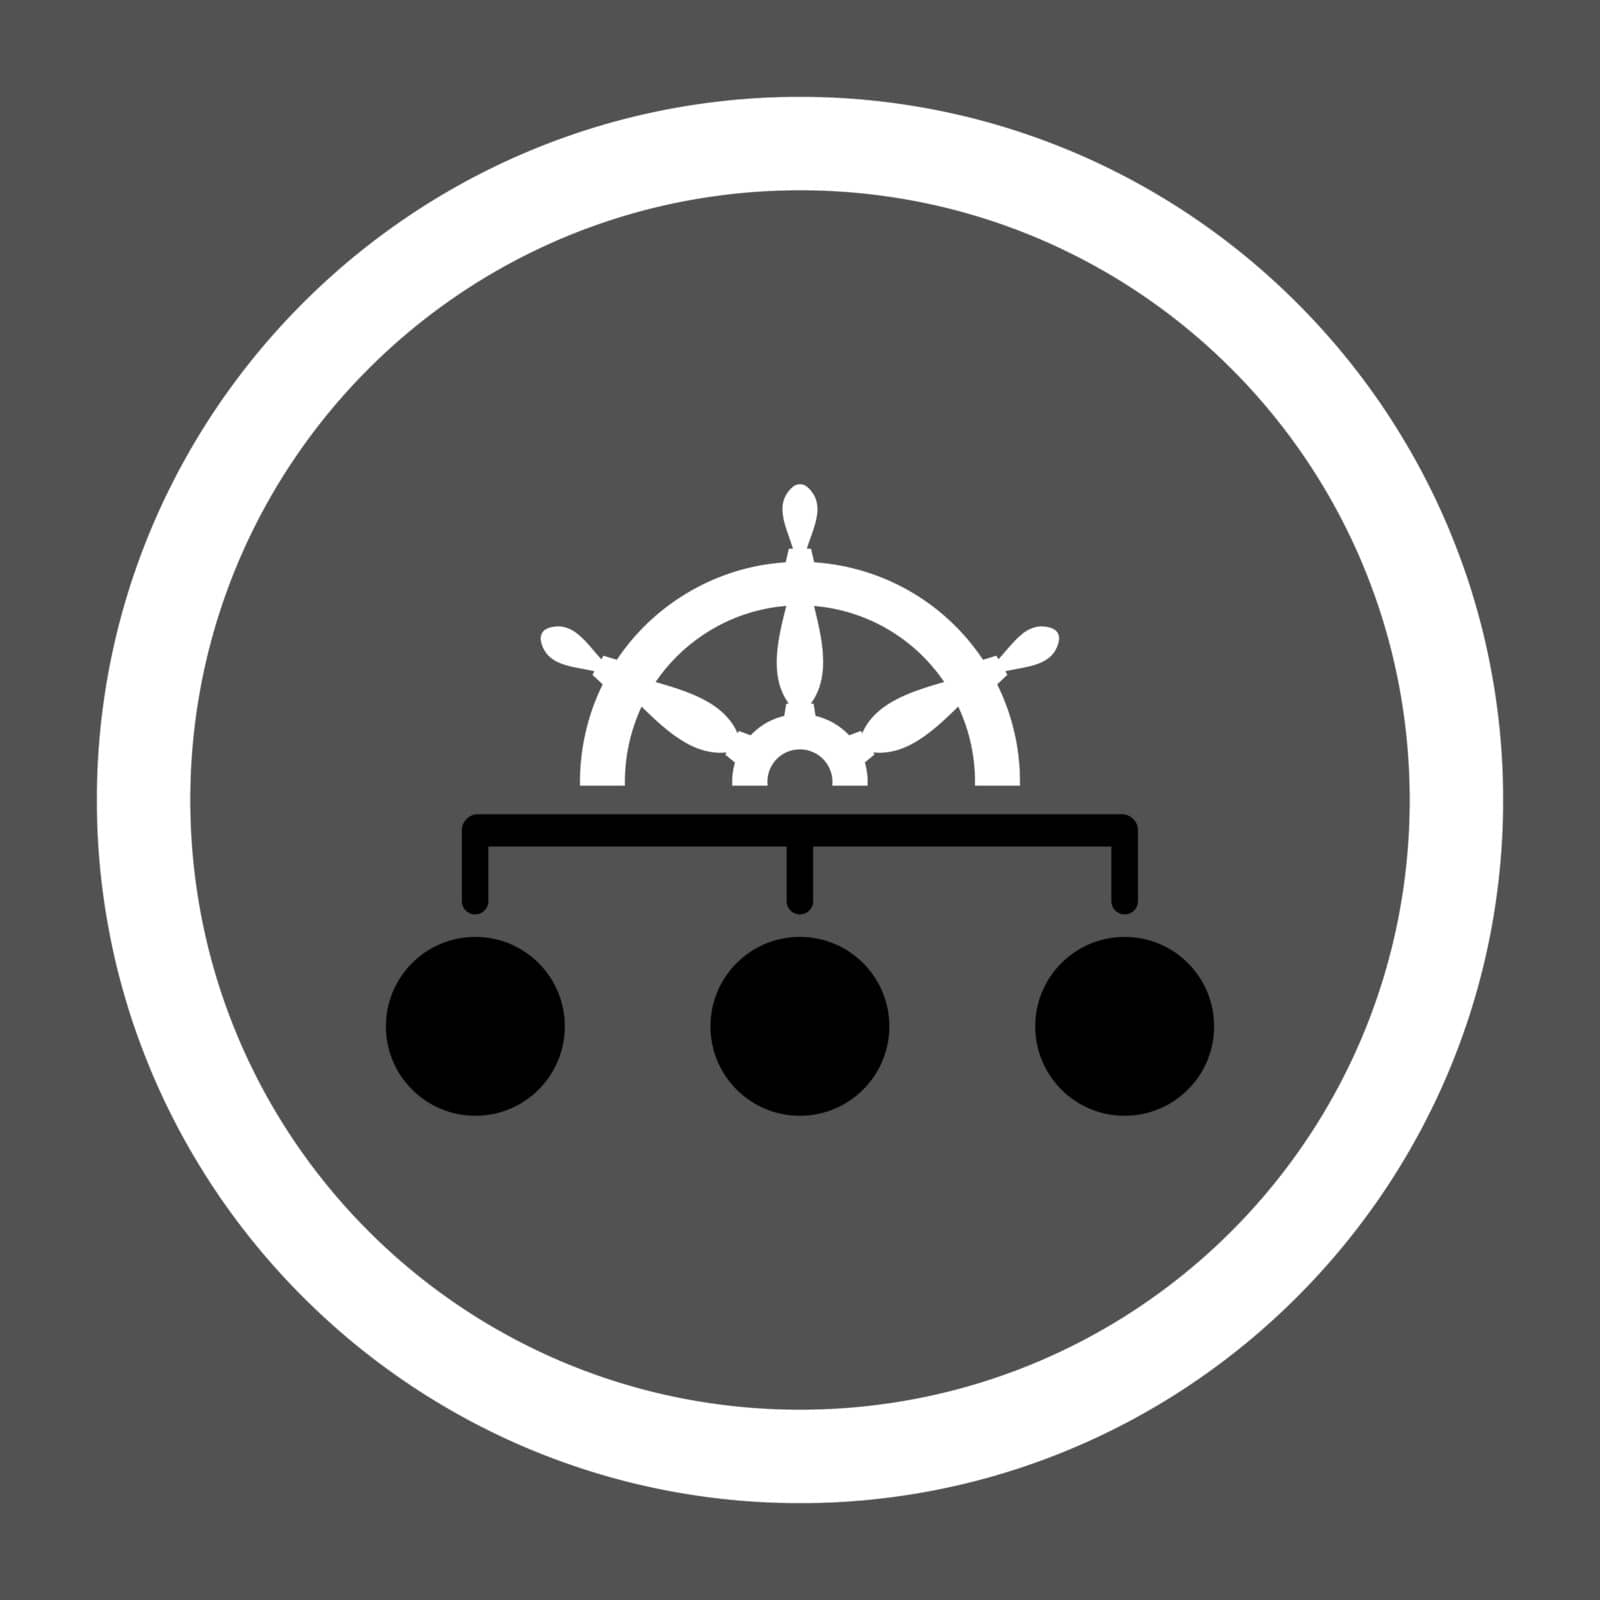 Rule vector icon. This rounded flat symbol is drawn with black and white colors on a gray background.